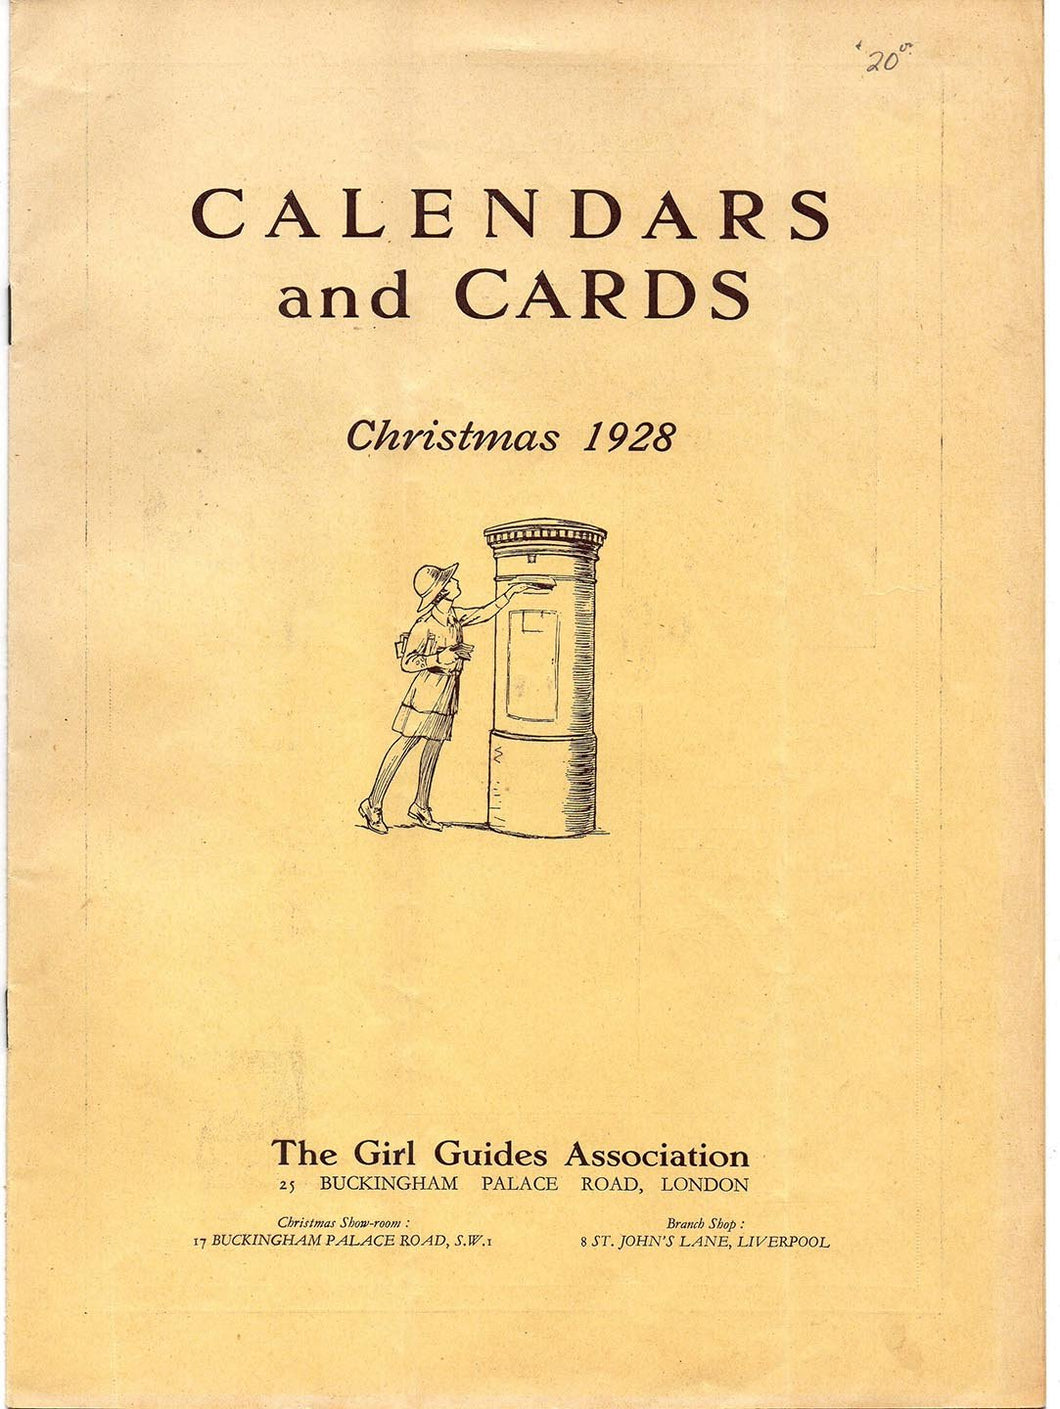 Girl Guides Calendars and Cards catalogue, Christmas 1928